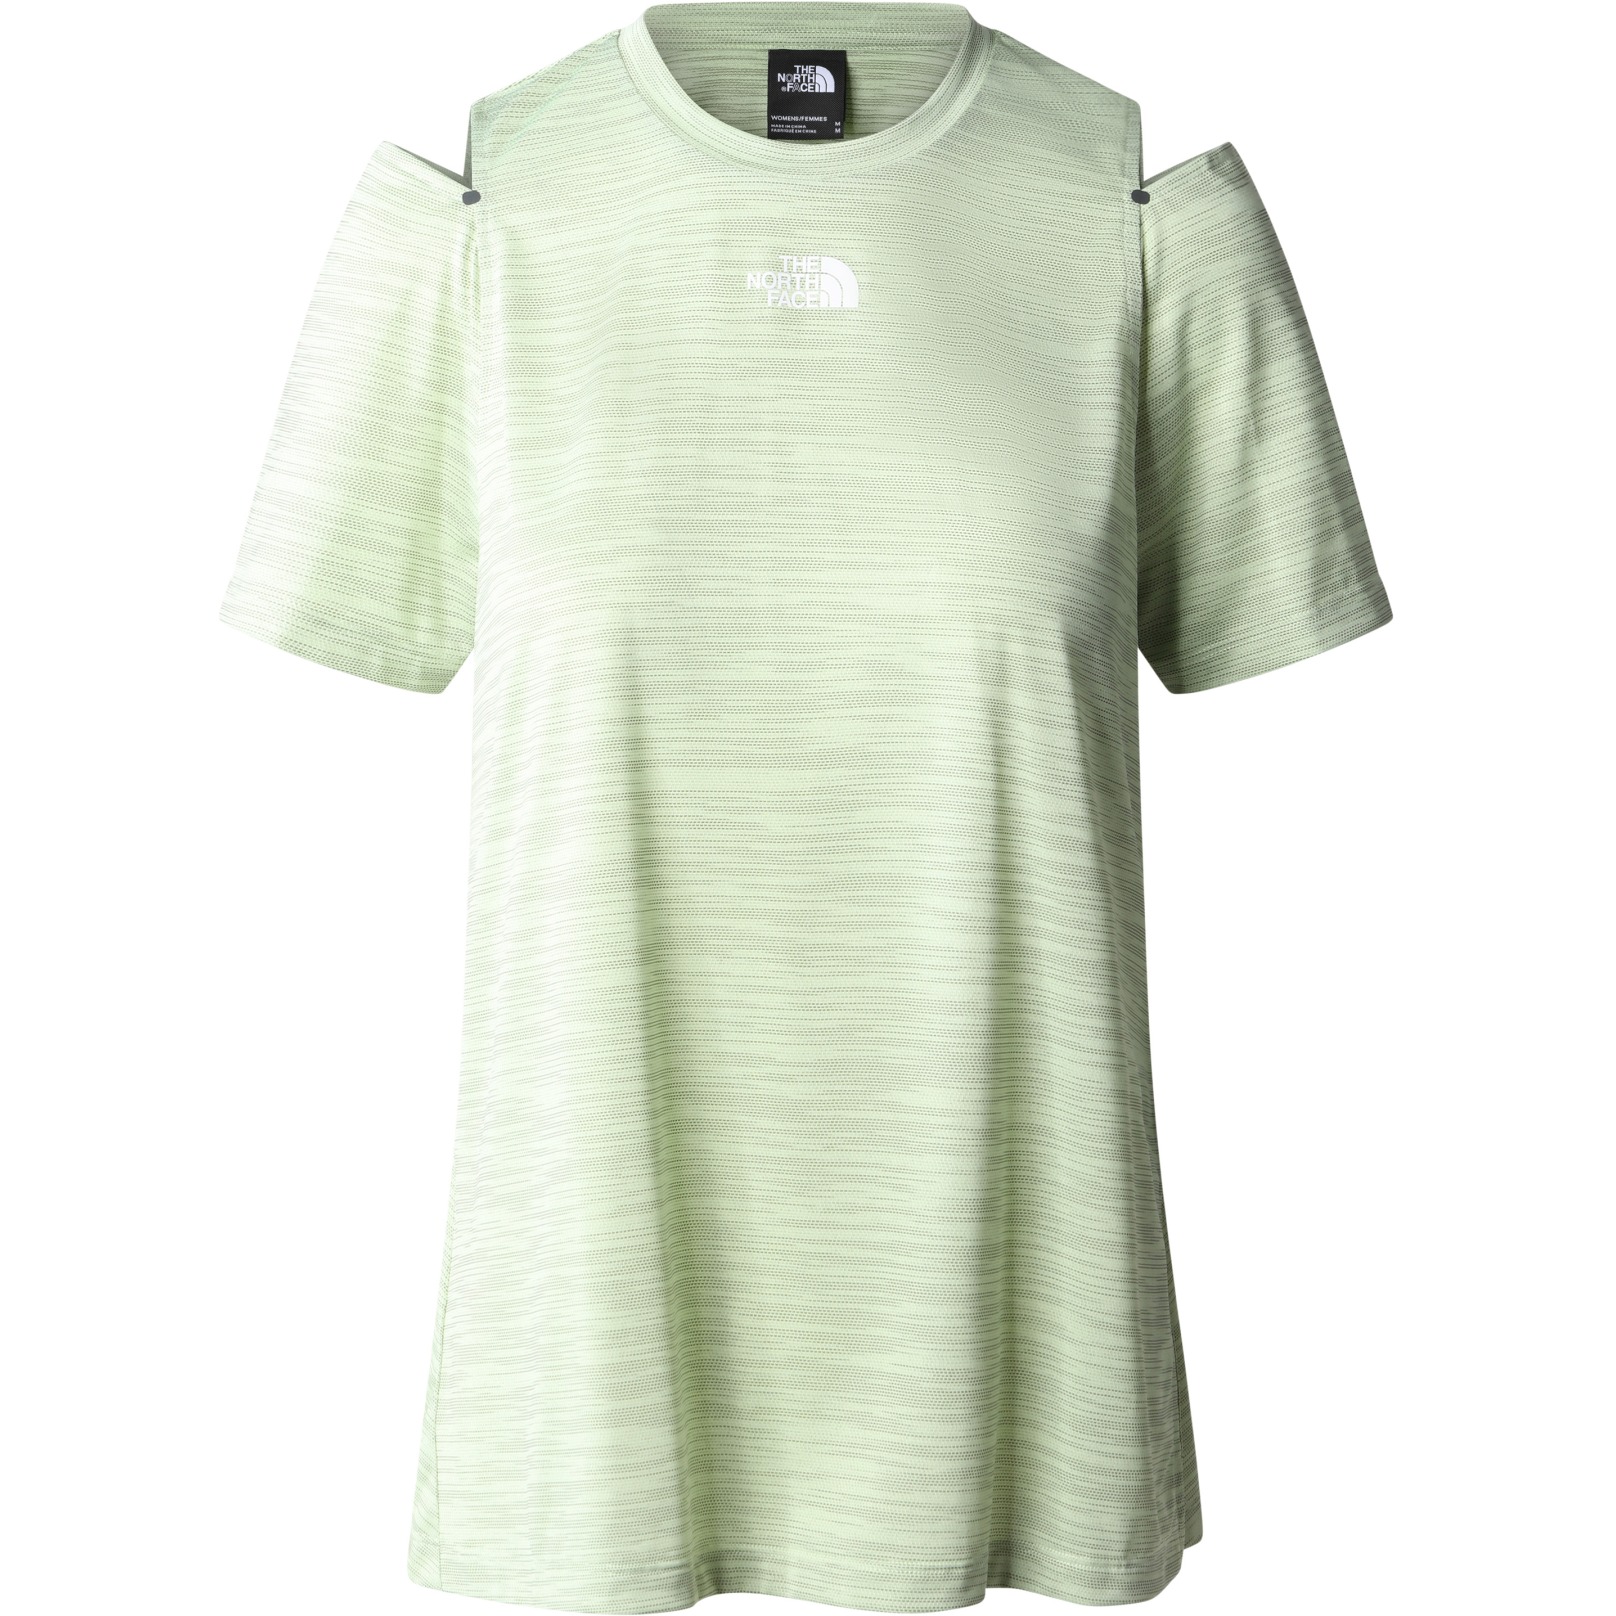 Image de The North Face T-Shirt Femme - Athletic Outdoor - Lime Cream/New Taupe Green